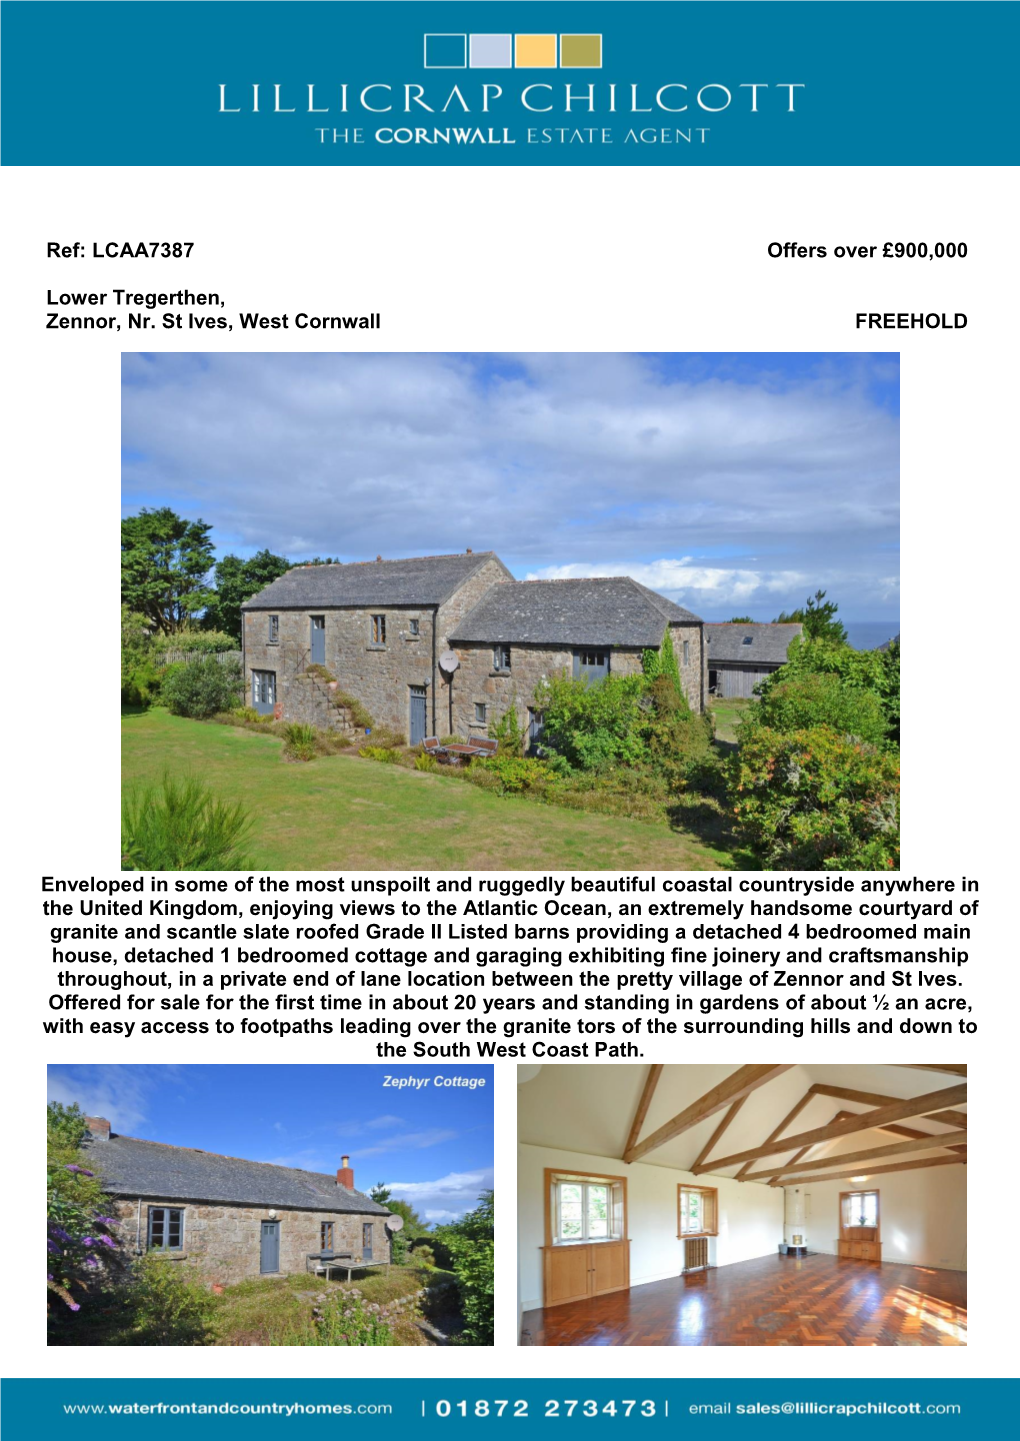 Ref: LCAA7387 Offers Over £900,000